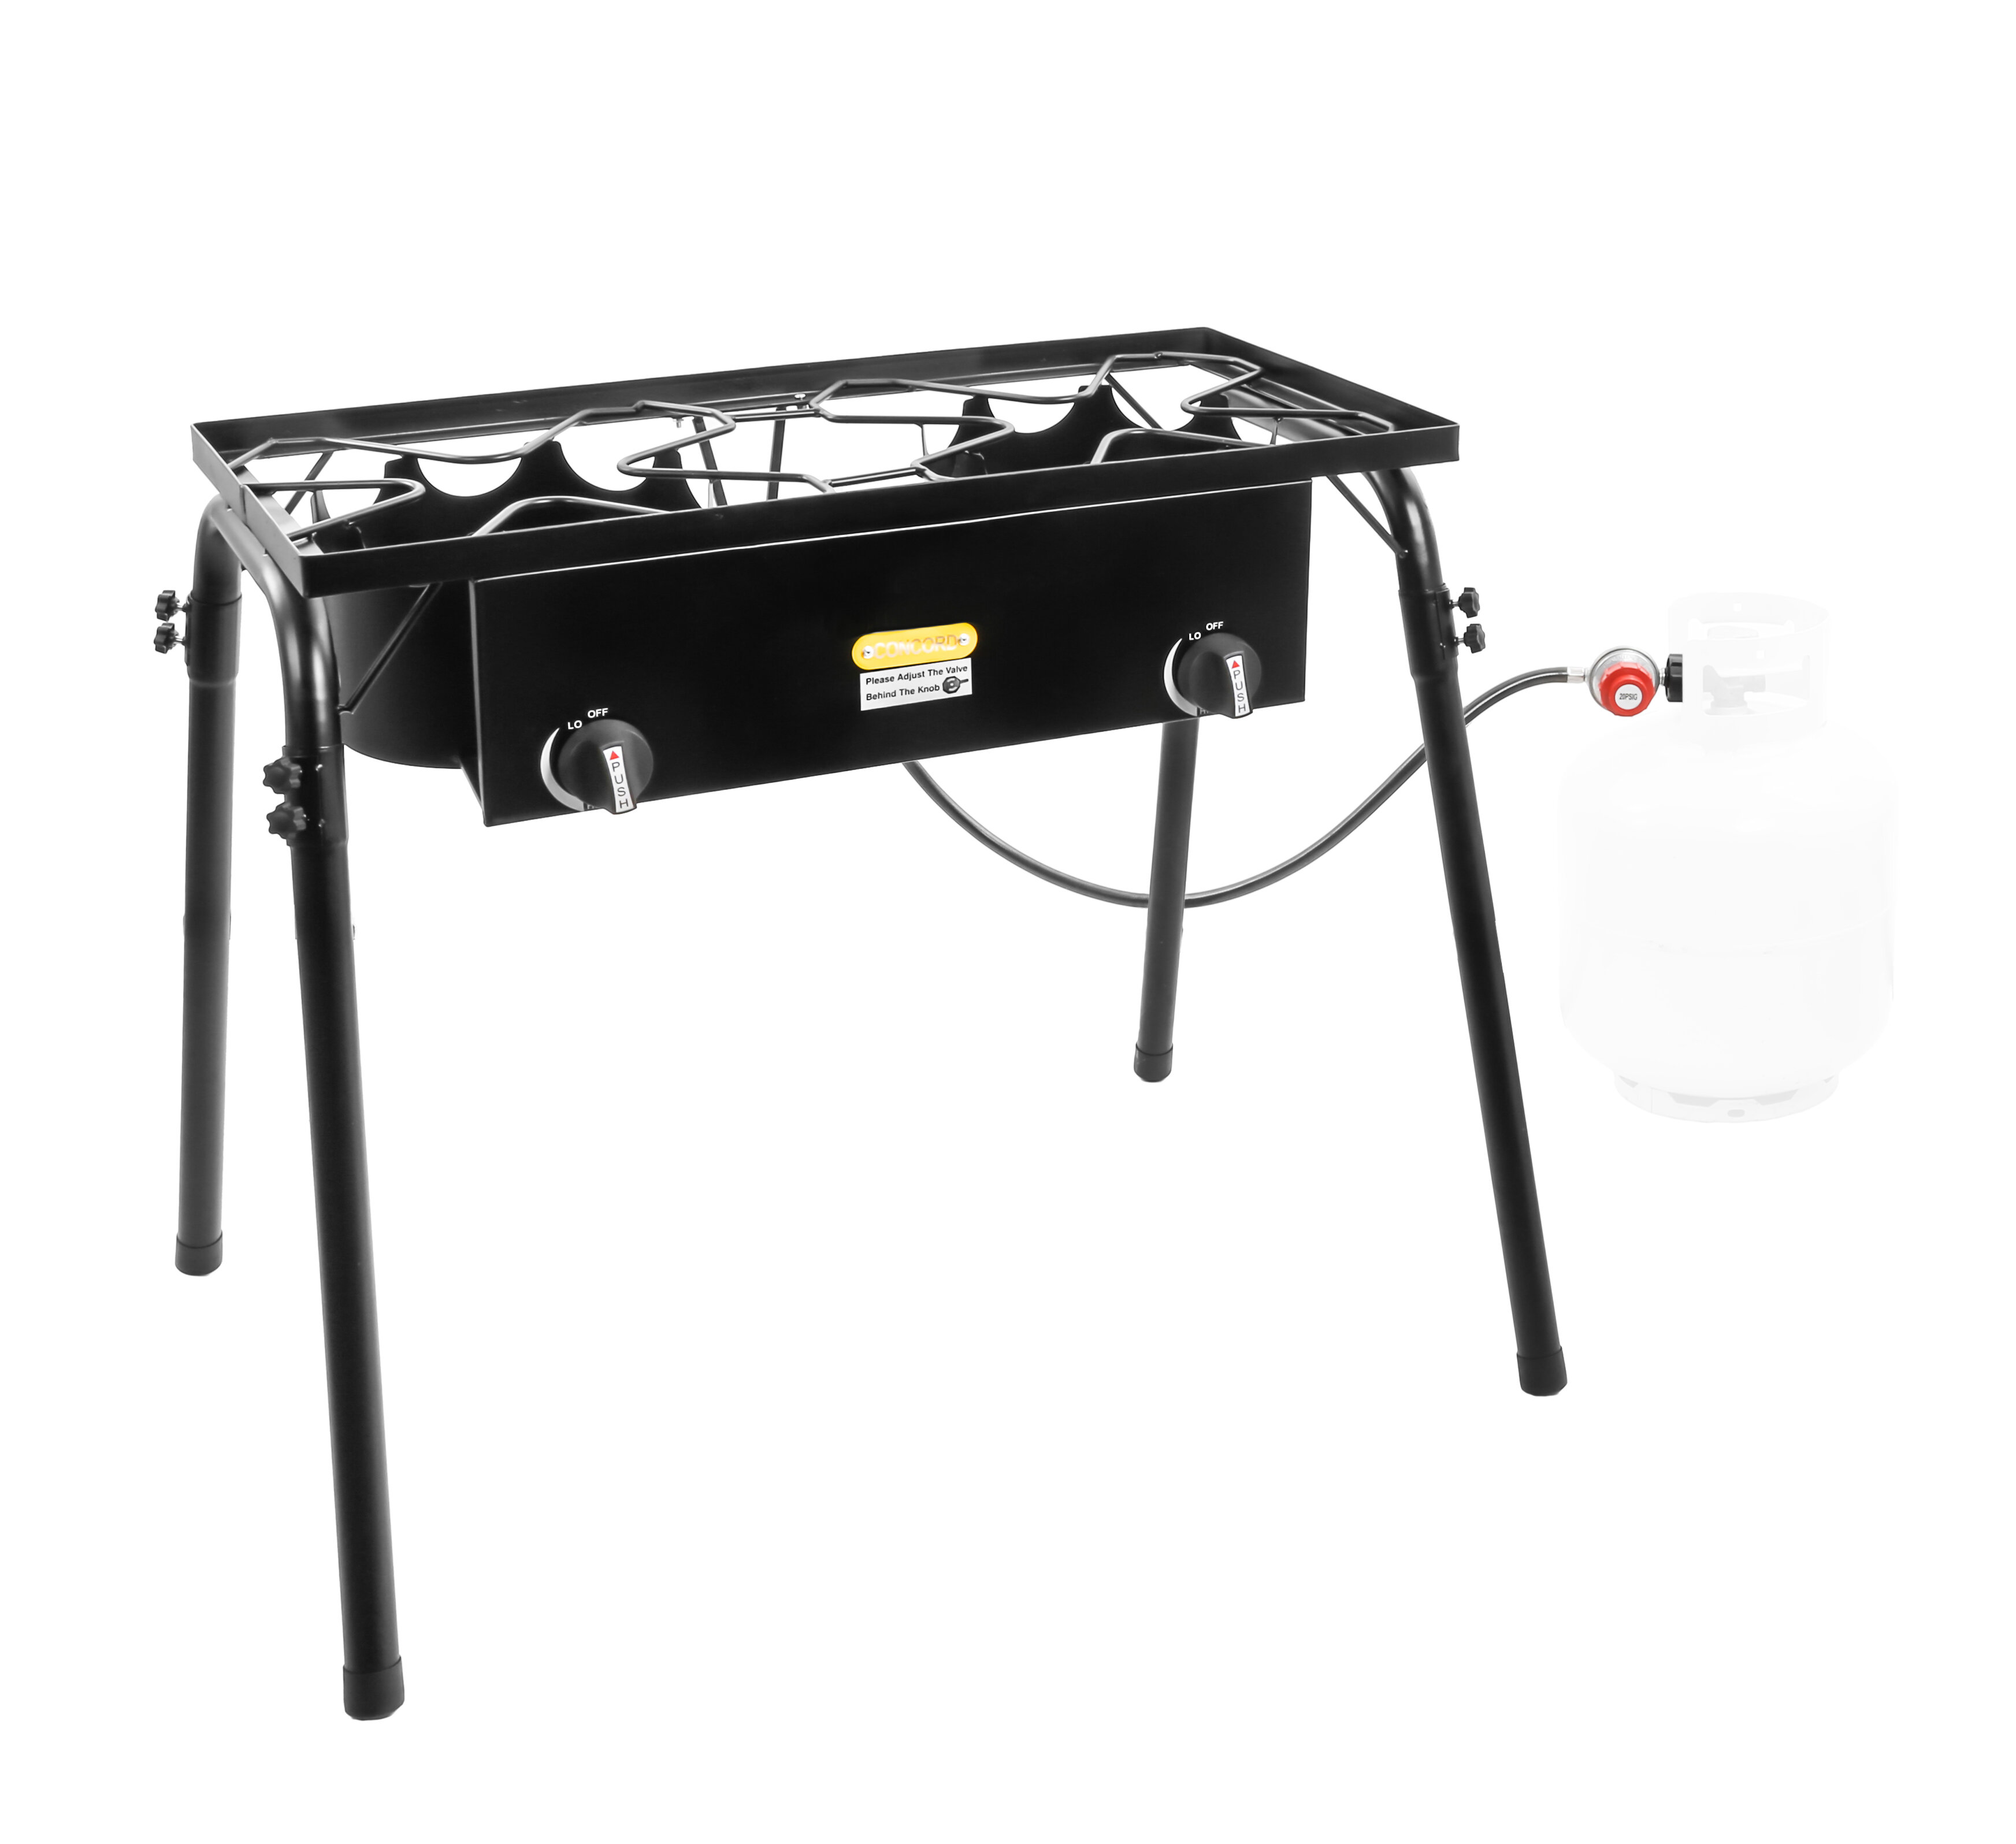 CONCORD Double Burner Outdoor Stand Stove Cooker w// Regulator Brewing Supply by Concord Cookware